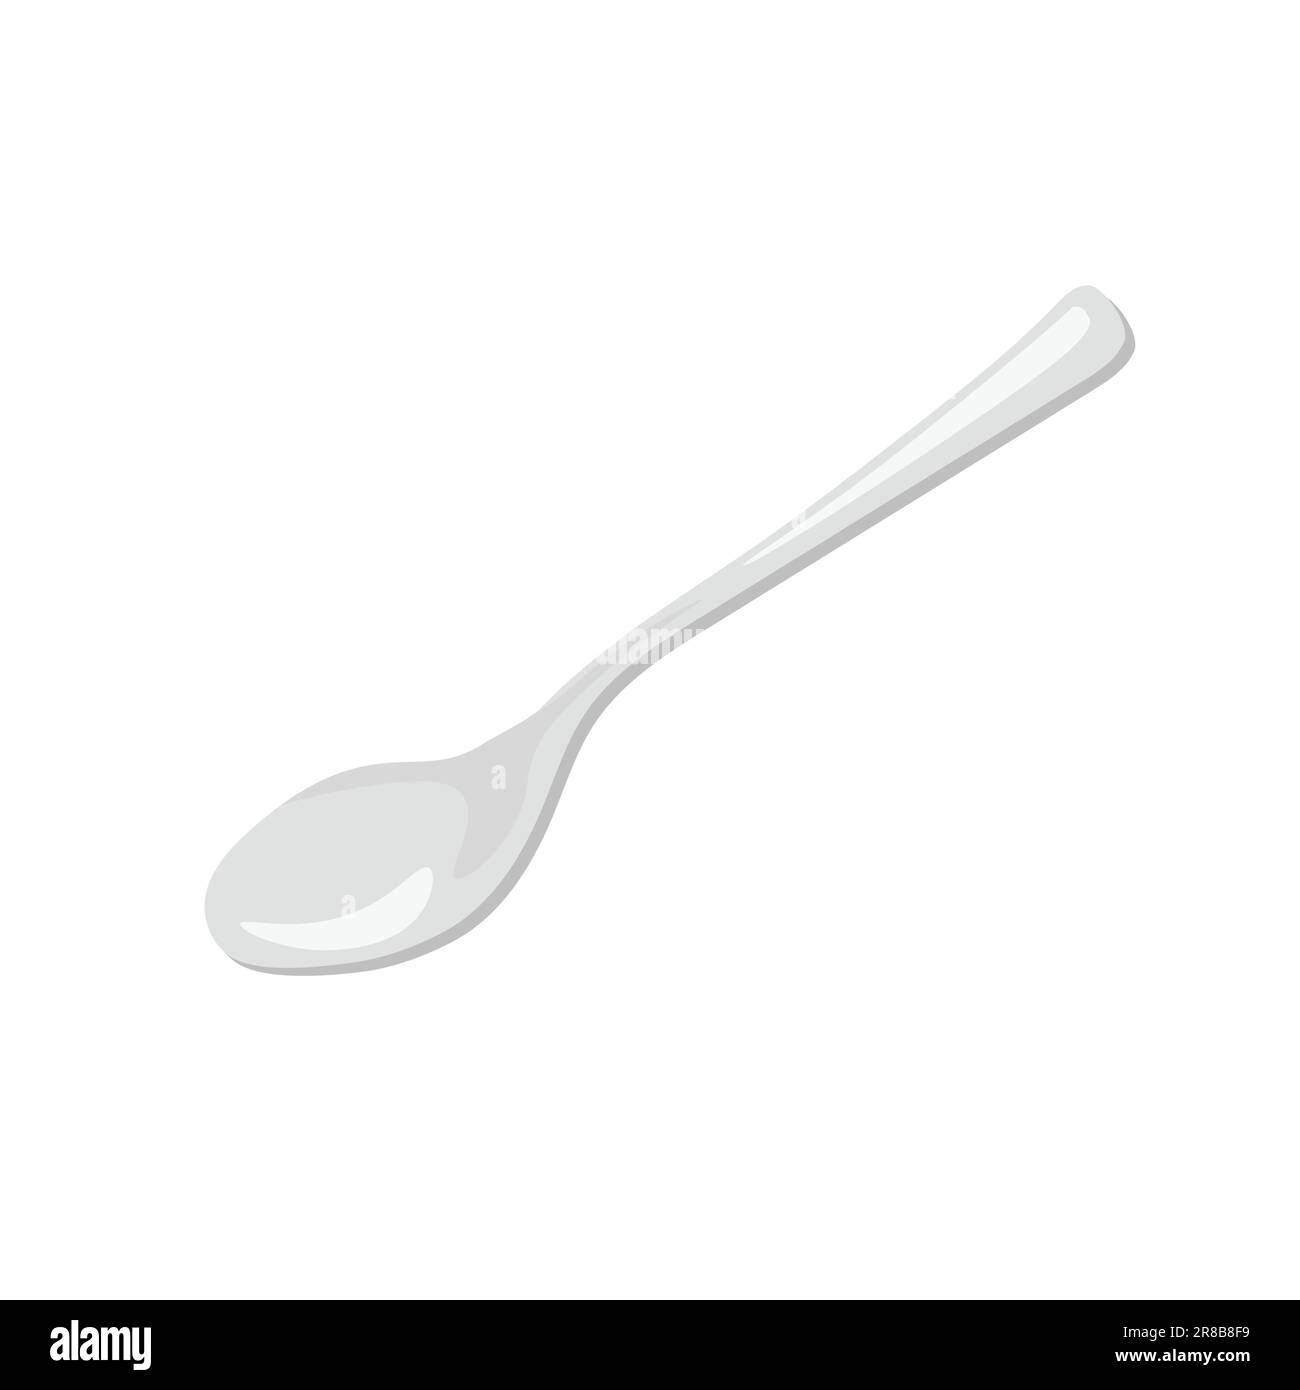 Metal empty silver spoon. Teaspoon side view. Vector illustration isolated on white background. Stock Vector